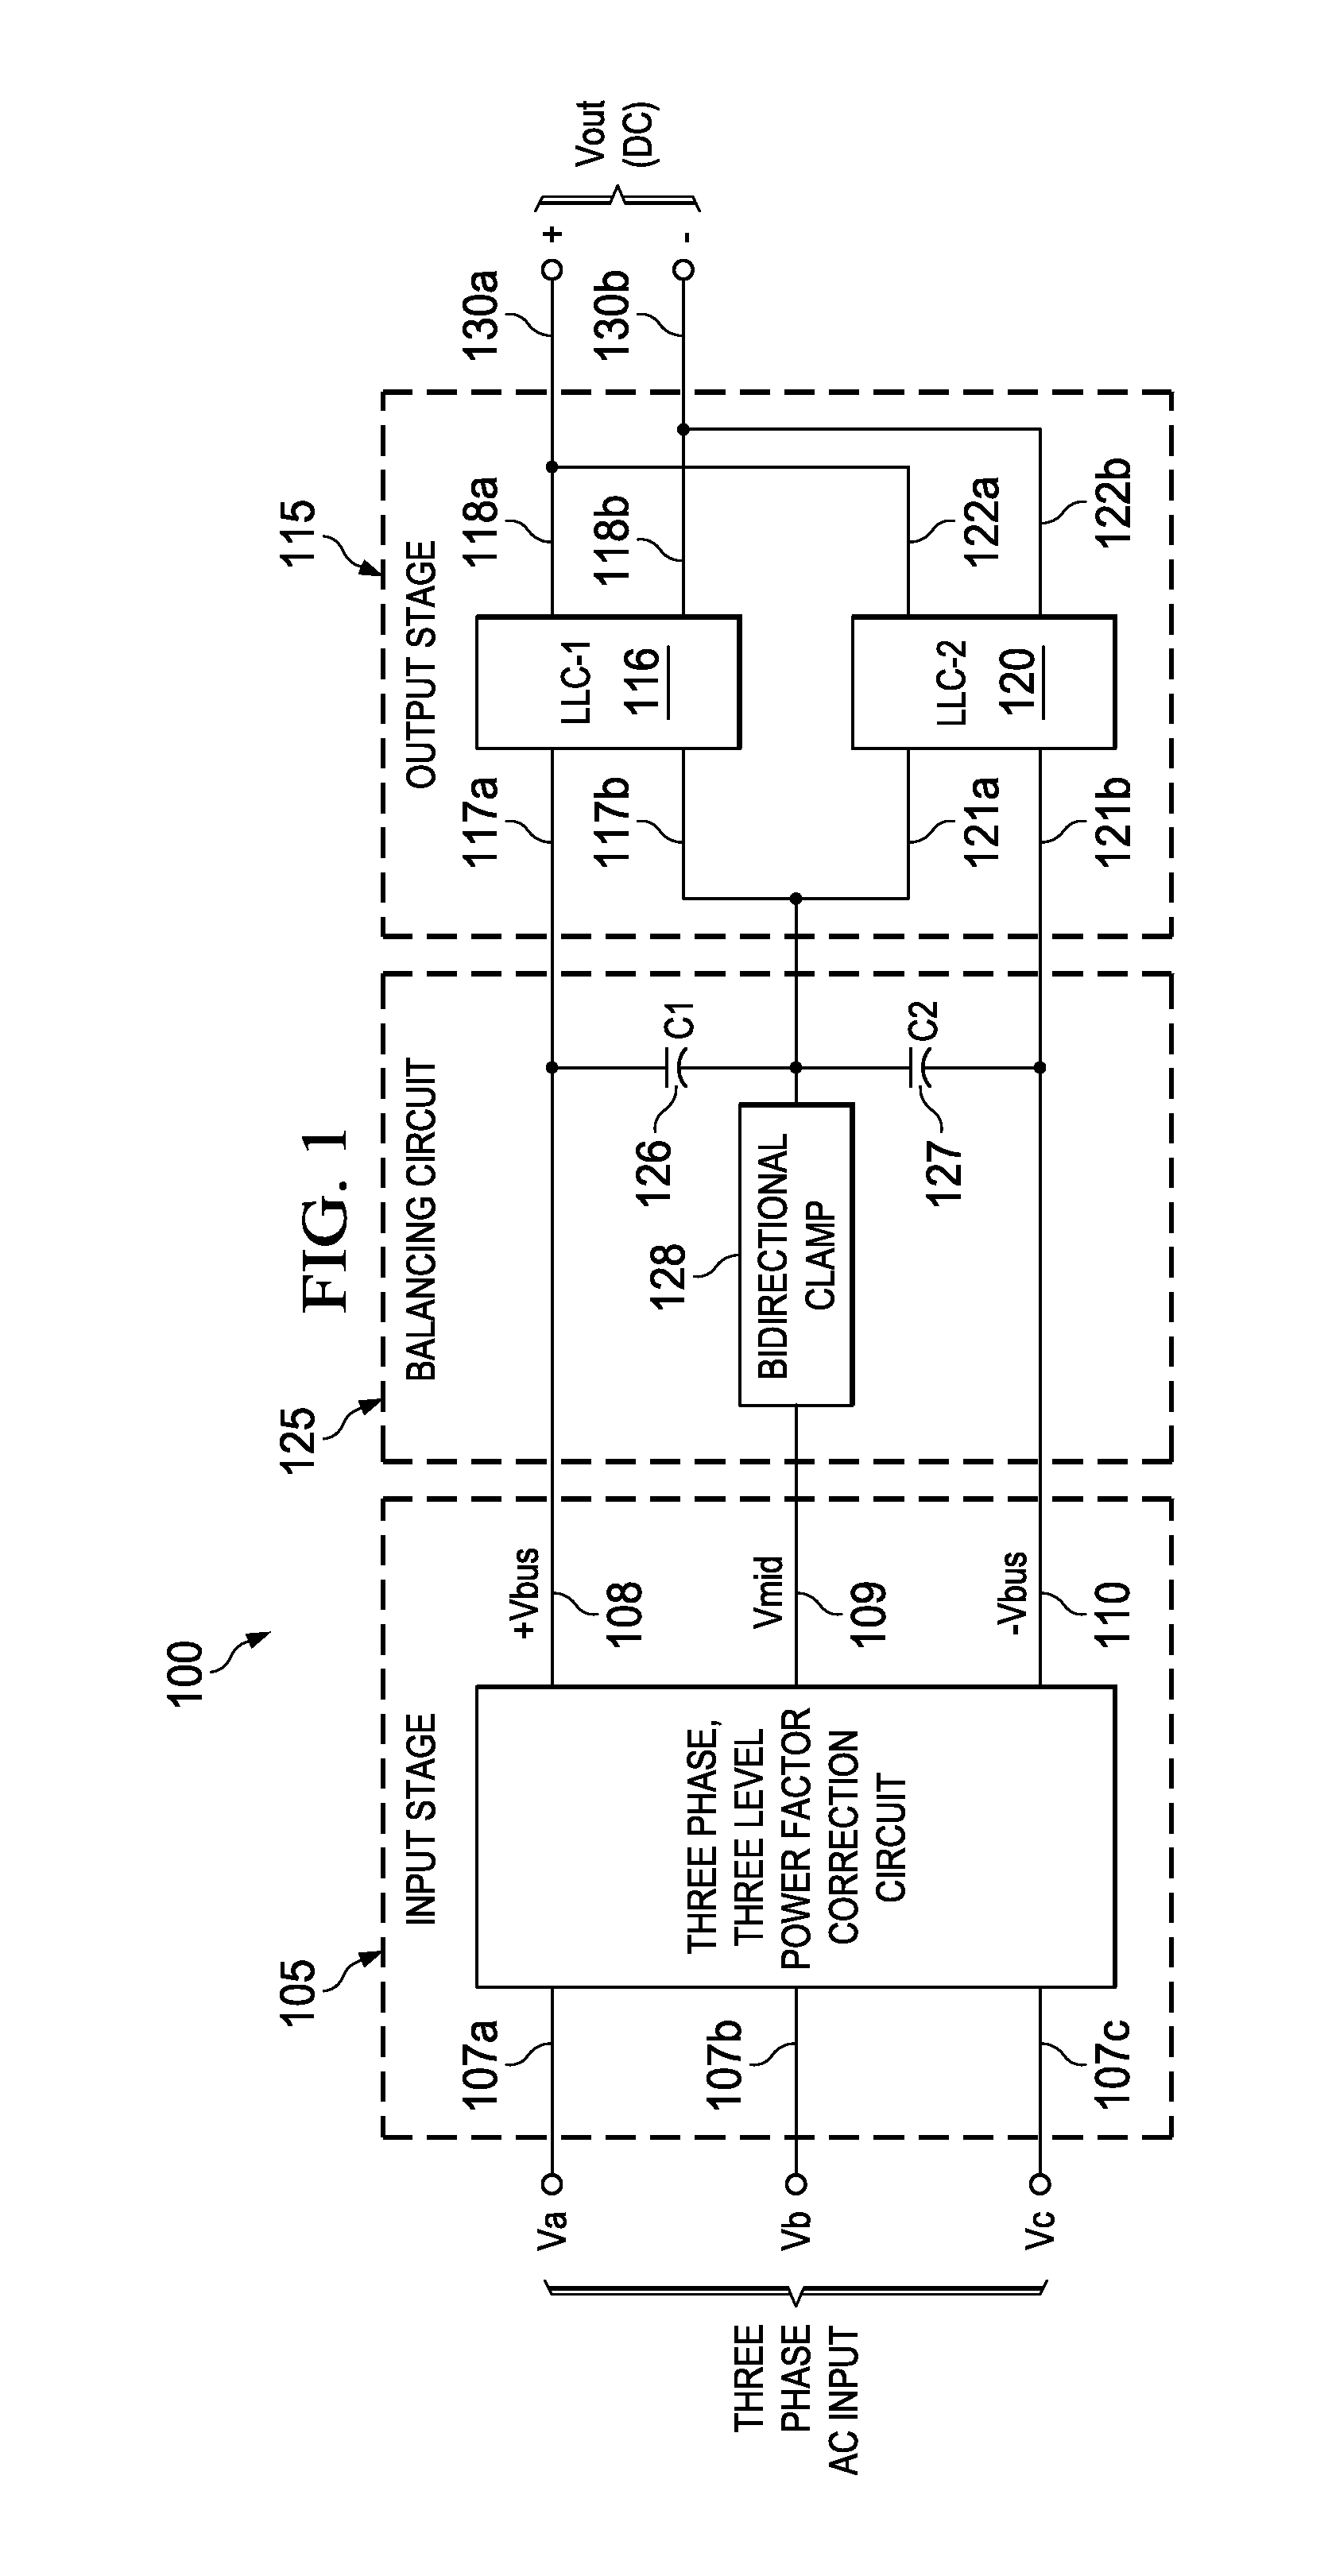 Multilevel power converter and methods of manufacturing and operation thereof